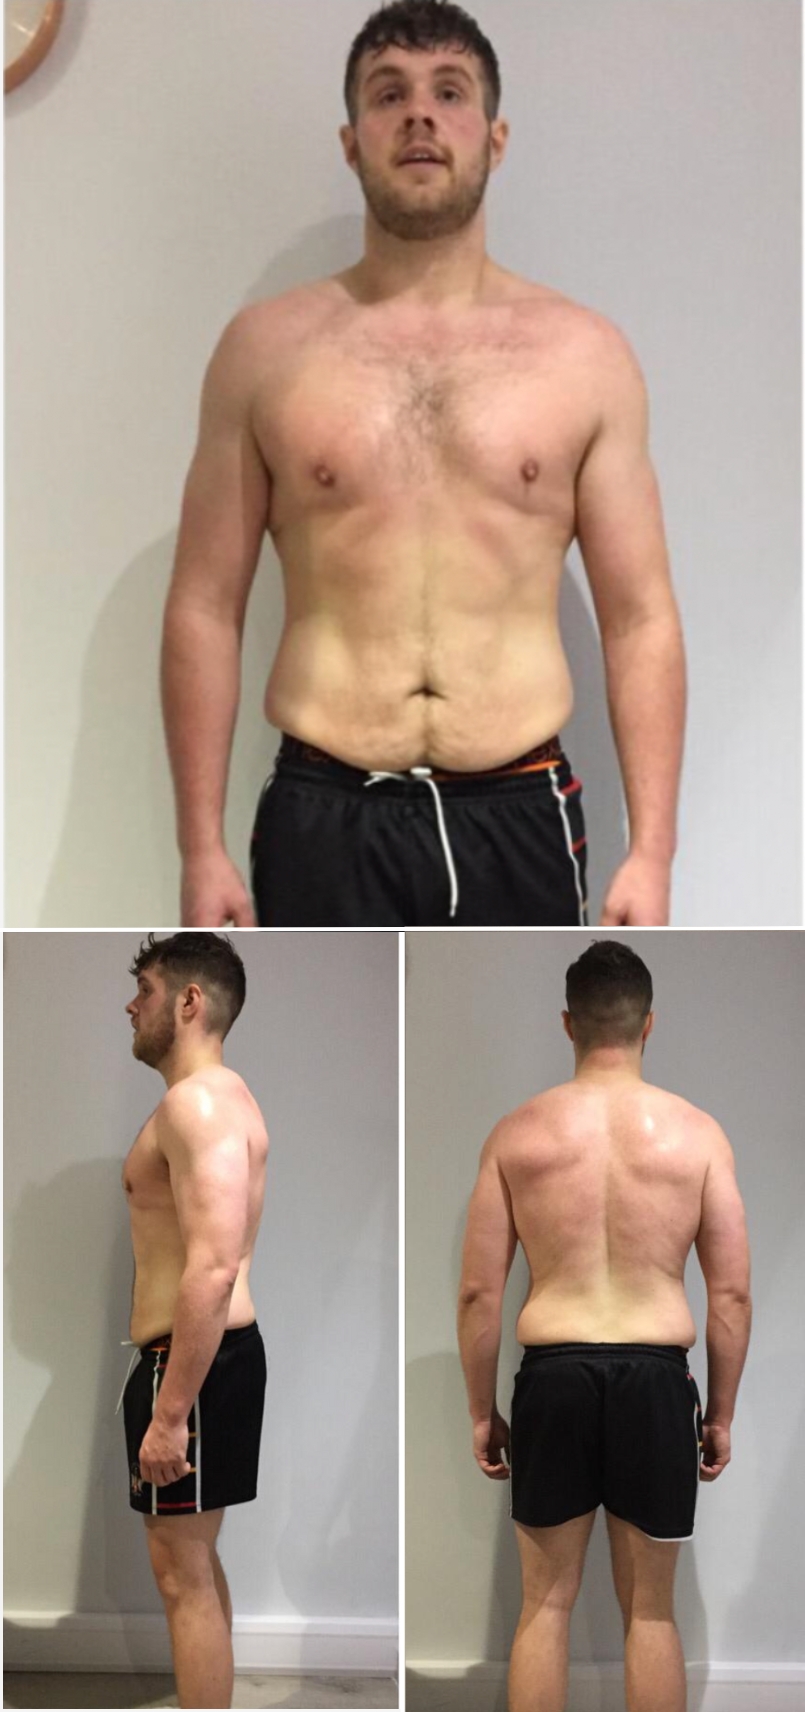 Sam Leister's after RELOAD group personal training transformation pictures